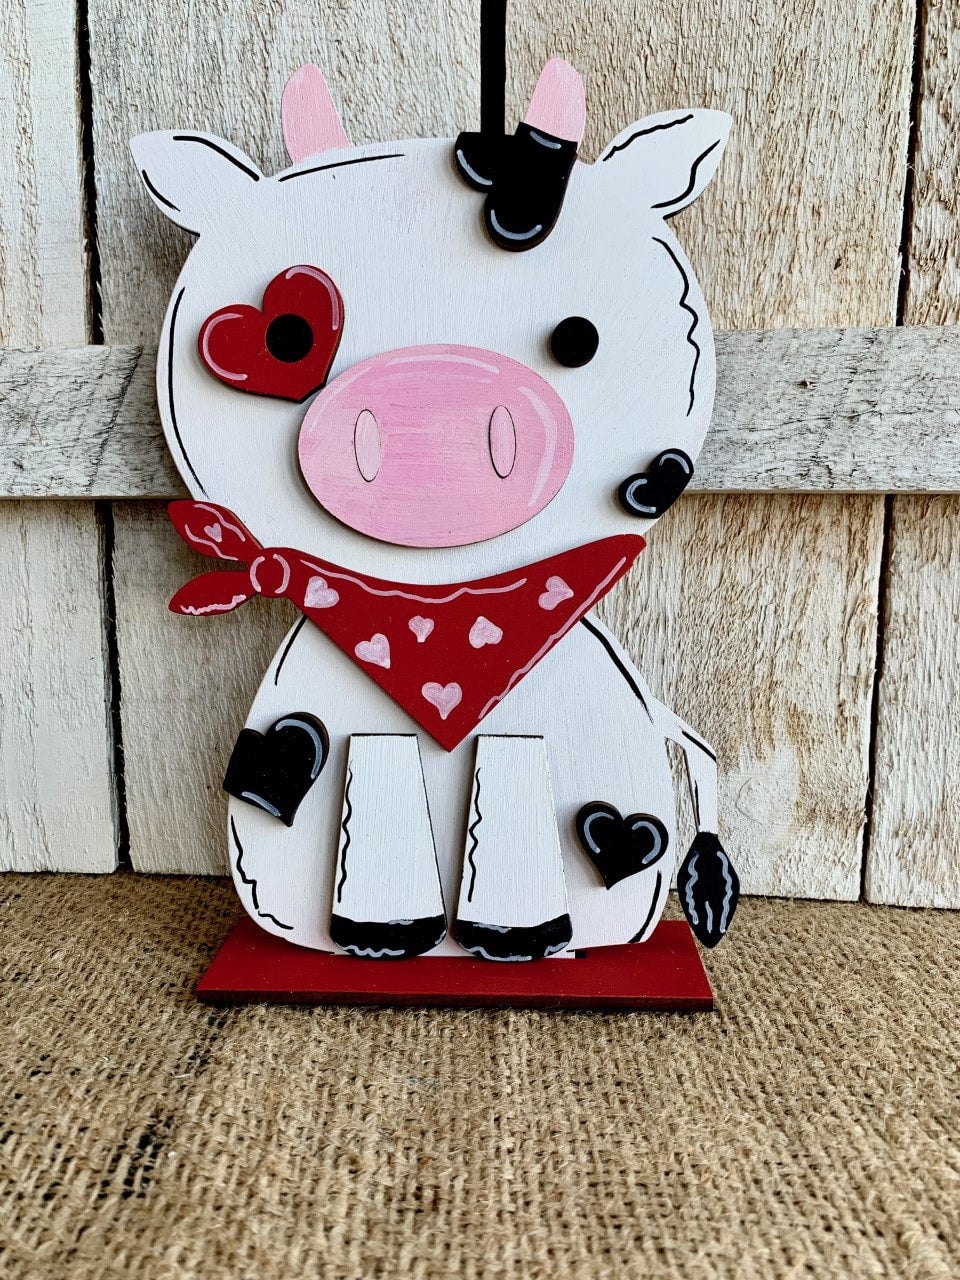 Valentine's Dog, Cat, Cow, Pig, Fox & Skunk Stand Up Take Home Kits